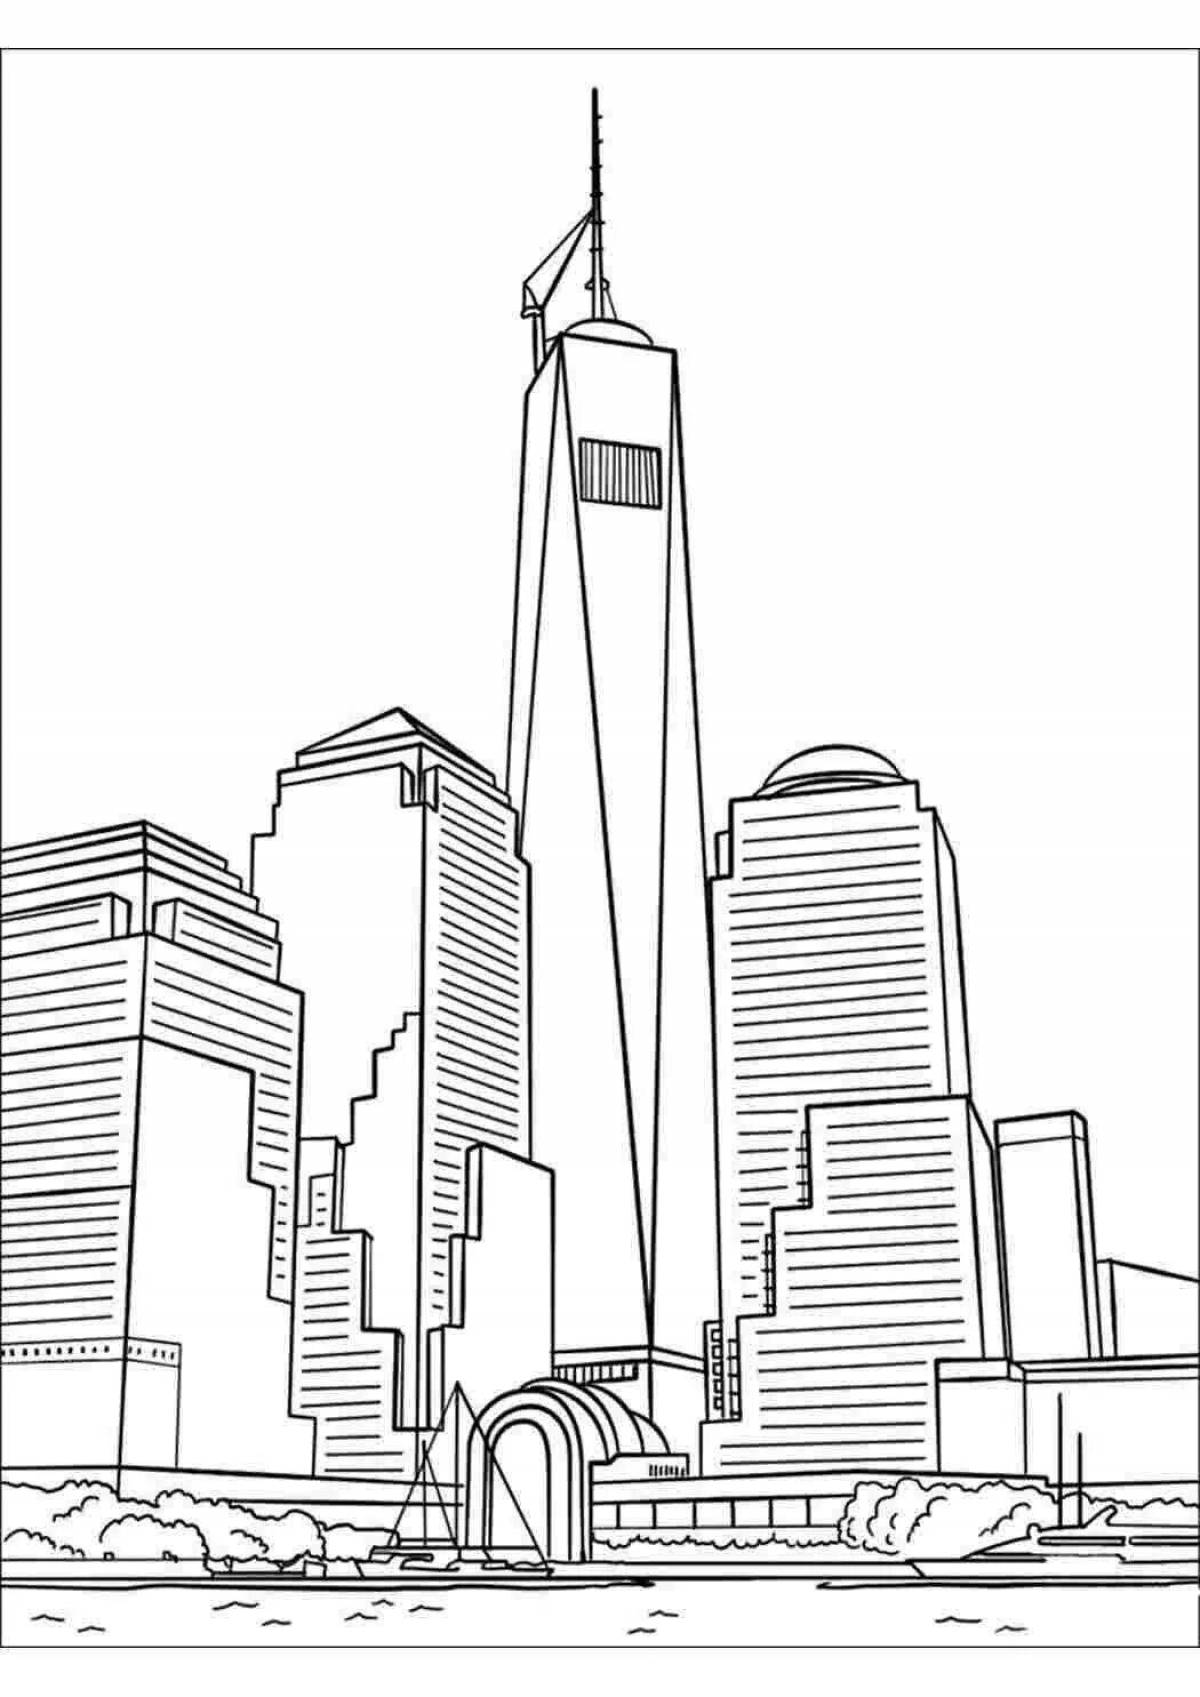 Playful skyscraper coloring page for kids